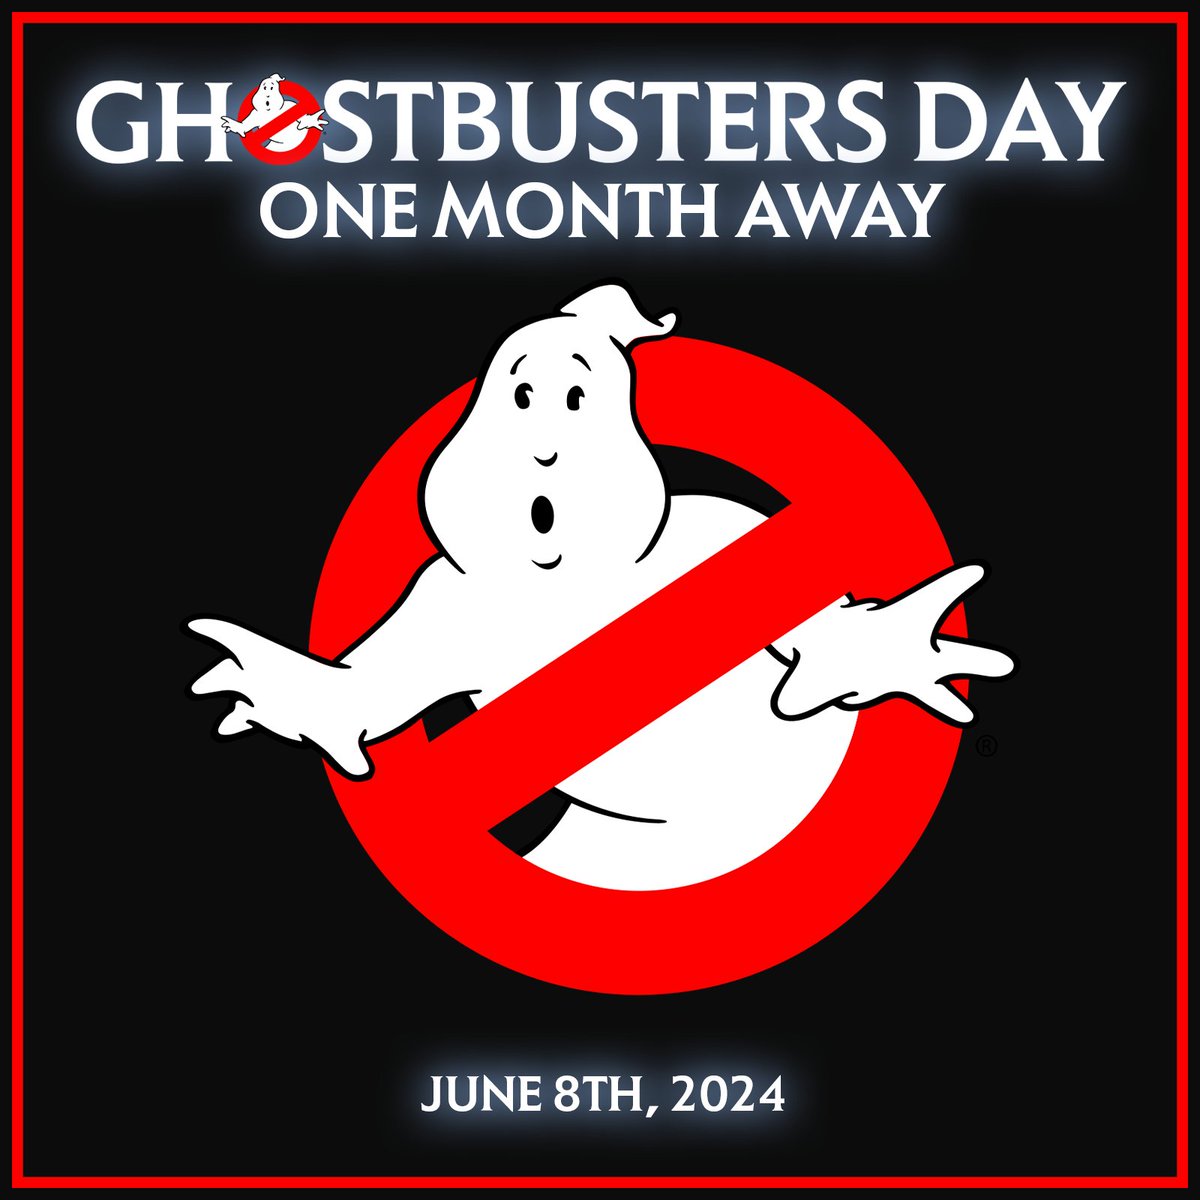 The countdown is on—just one month to go until the 40th anniversary of Ghostbusters! What announcements are you hoping for on Ghostbusters Day? Reply sharing your thoughts and predictions!